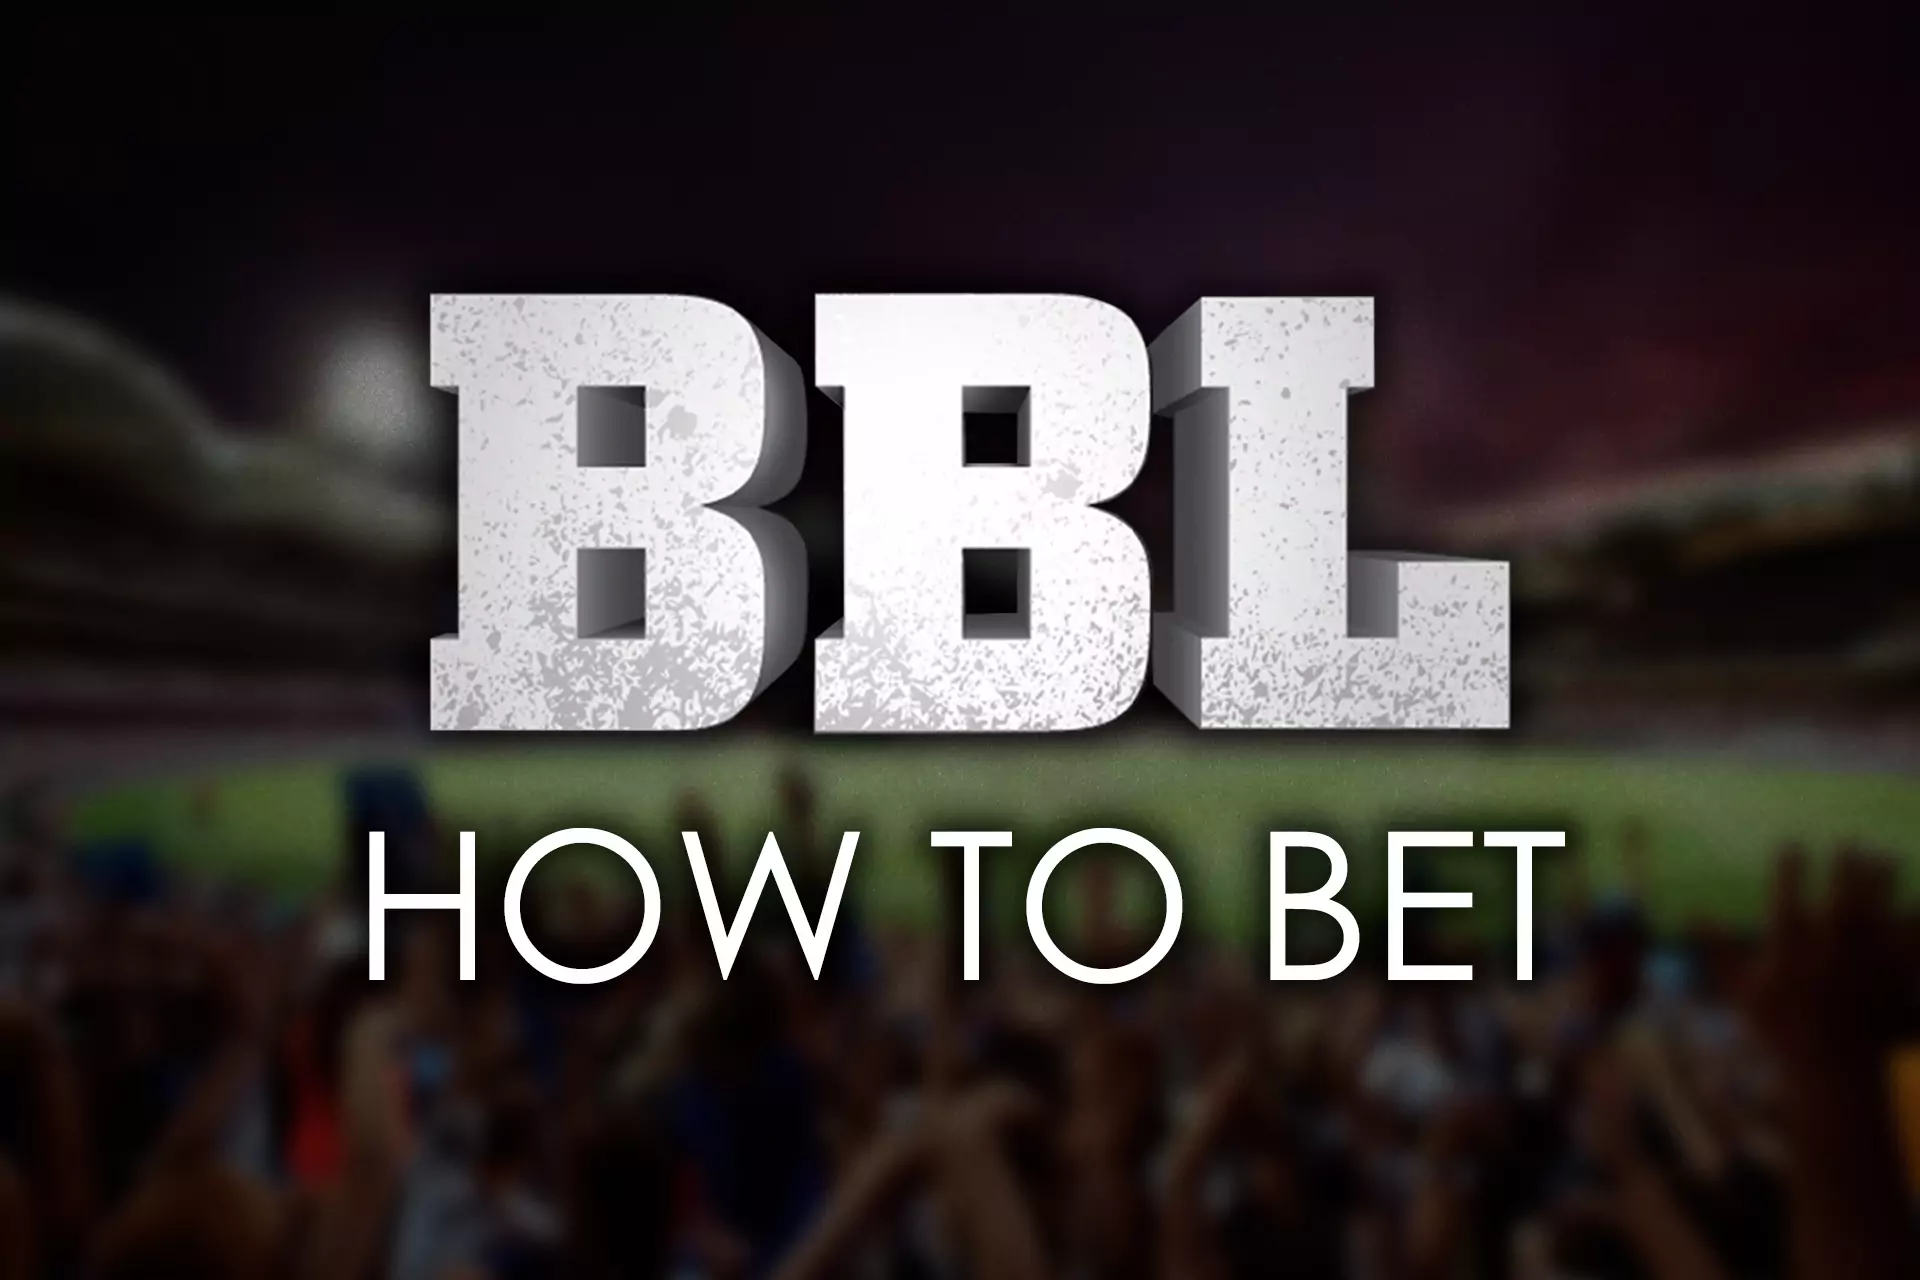 To bet on the BBL events you need to create an account on the bookmaker's office official website.